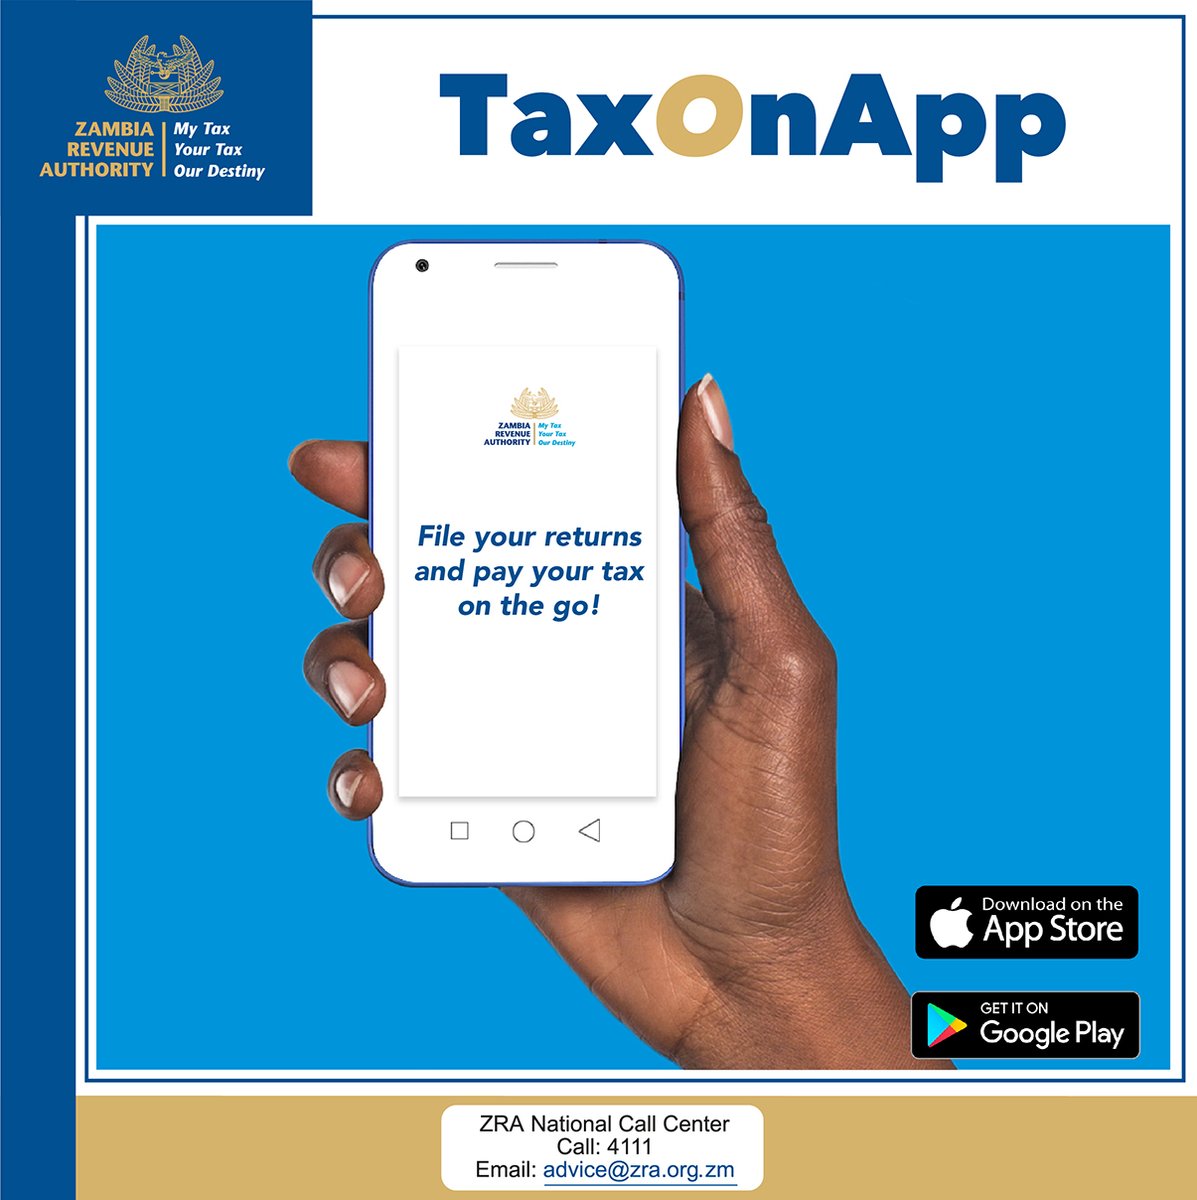 What are you waiting for? Download the TaxOnApp for easier access to your tax account. The app is available on Google Play and the App Store: apple.co/37LjlhN bit.ly/3isOFqu #TaxOnApp #TaxCompliance #2022